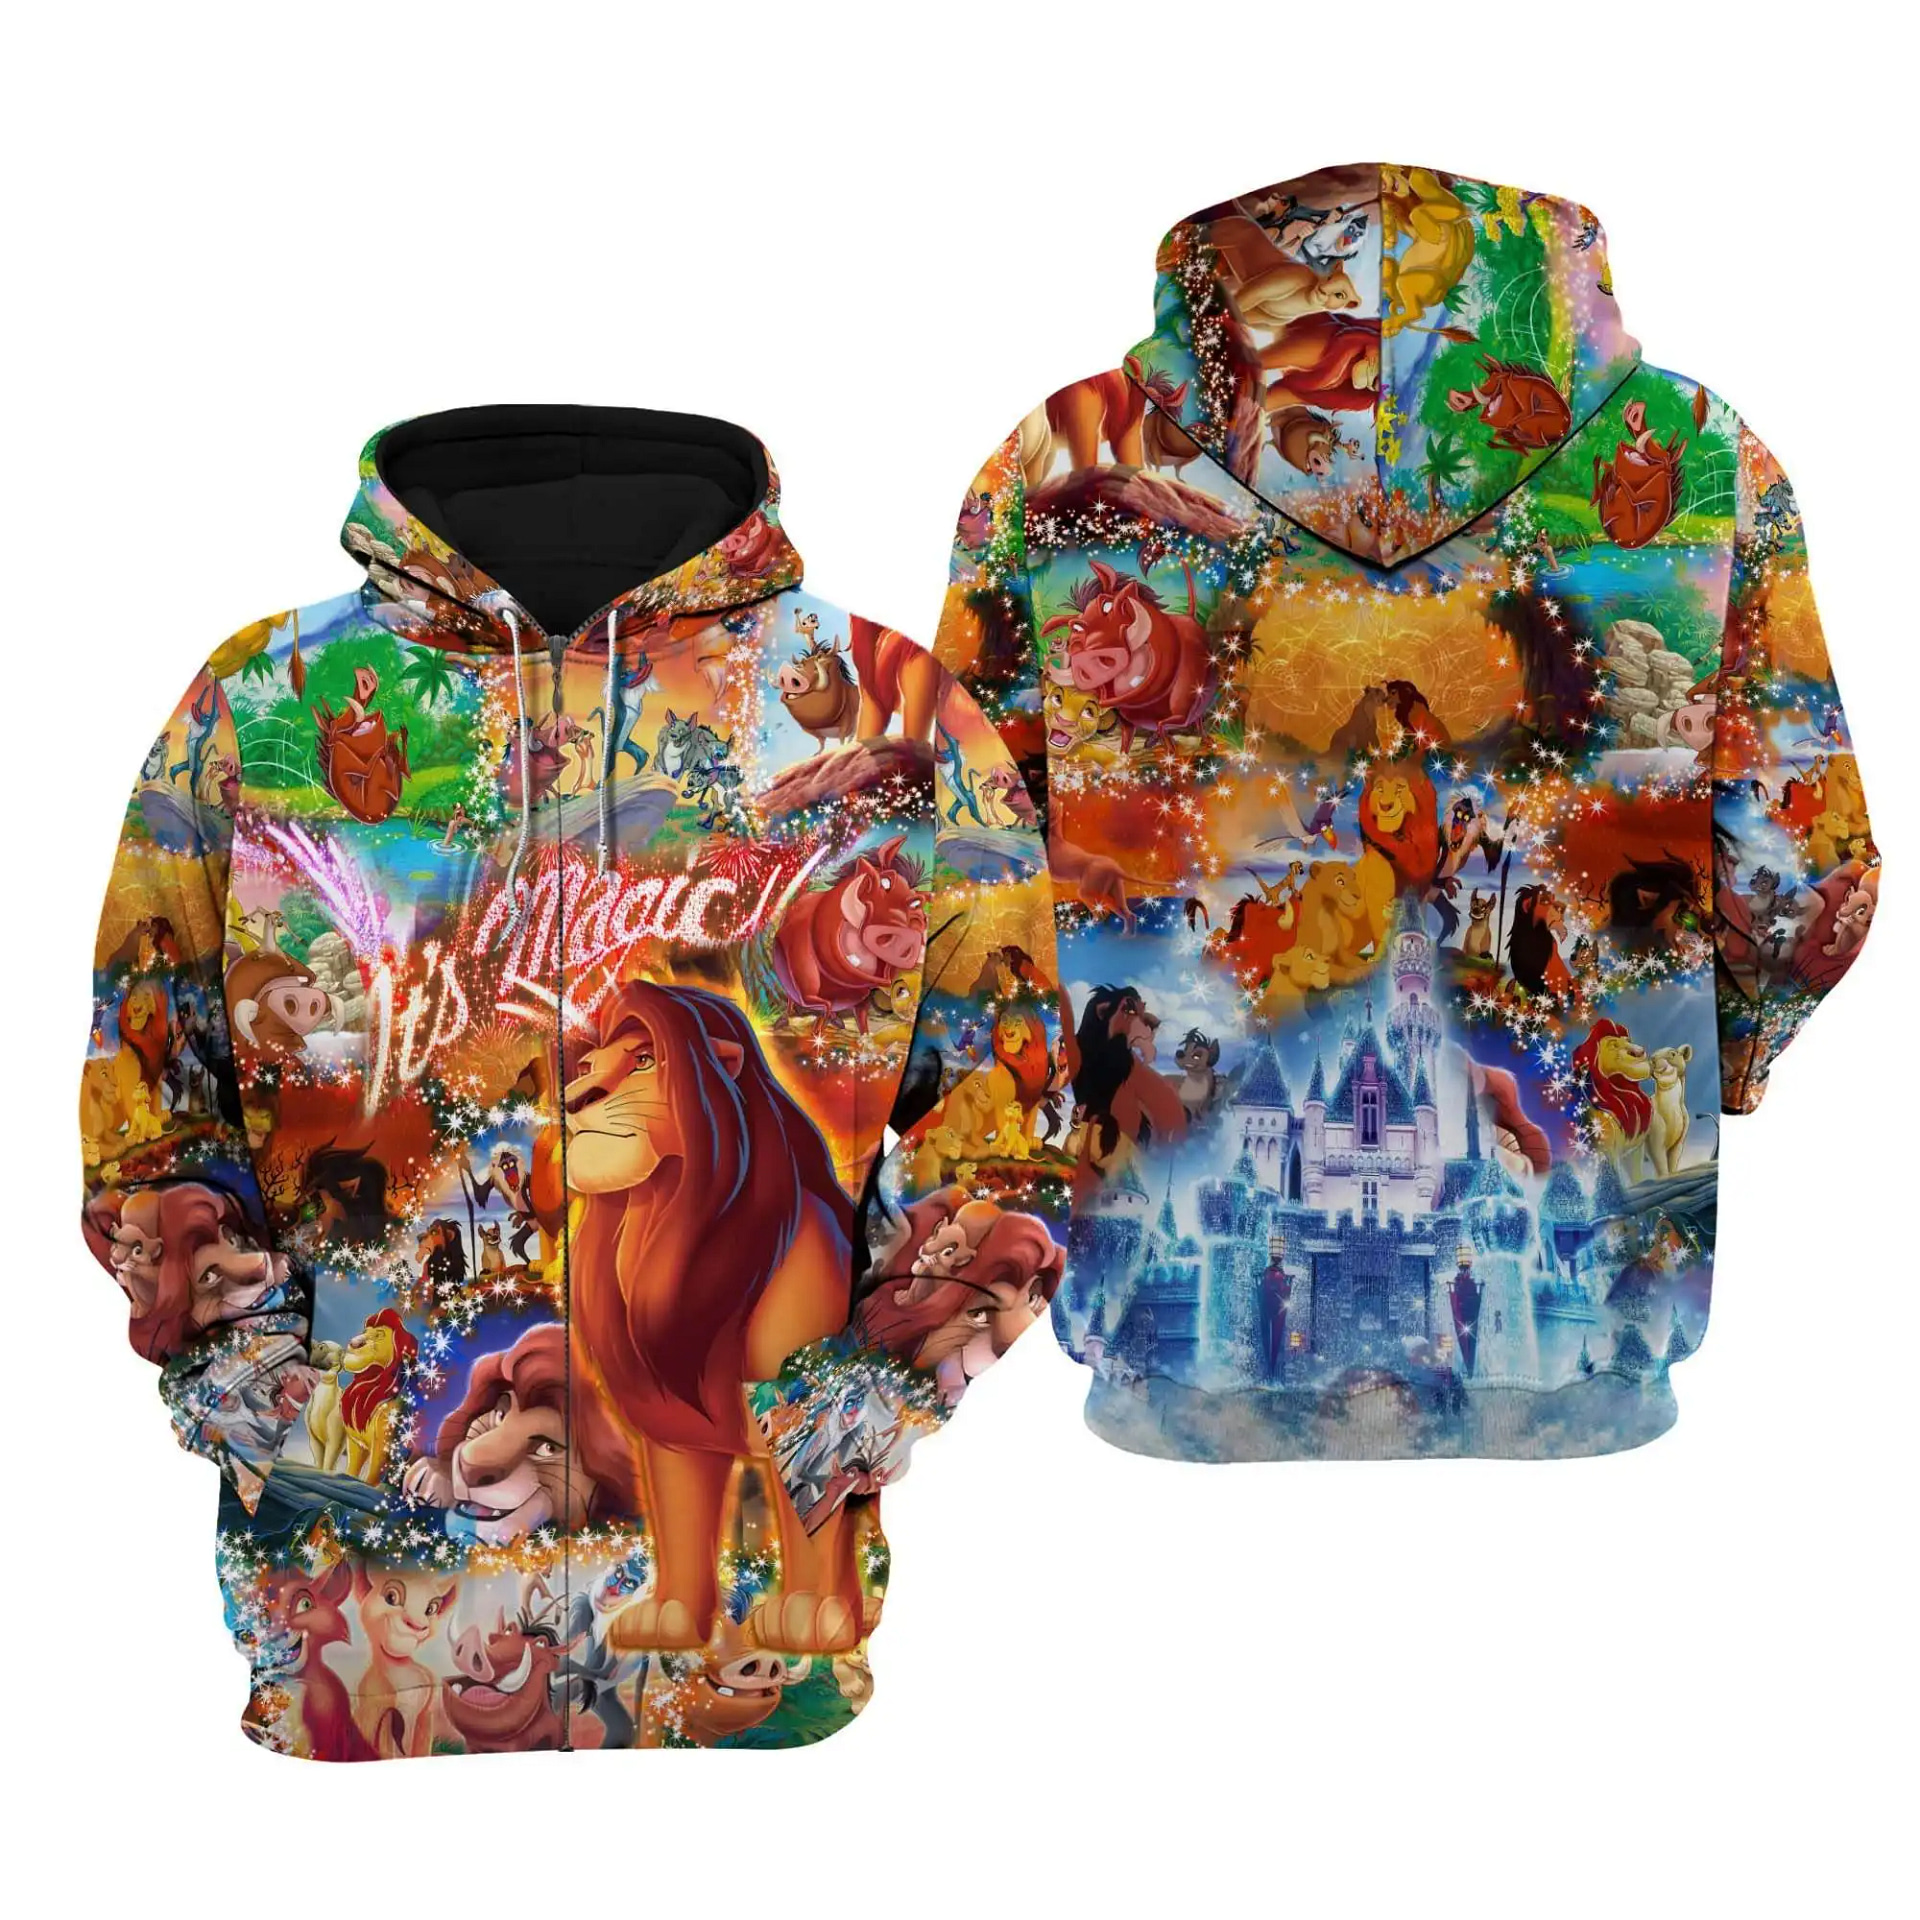 Simba The Lion King Its Magic Disney Cartoon Graphic Outfit Clothing Men Women Kids Toddlers Hoodie 3D